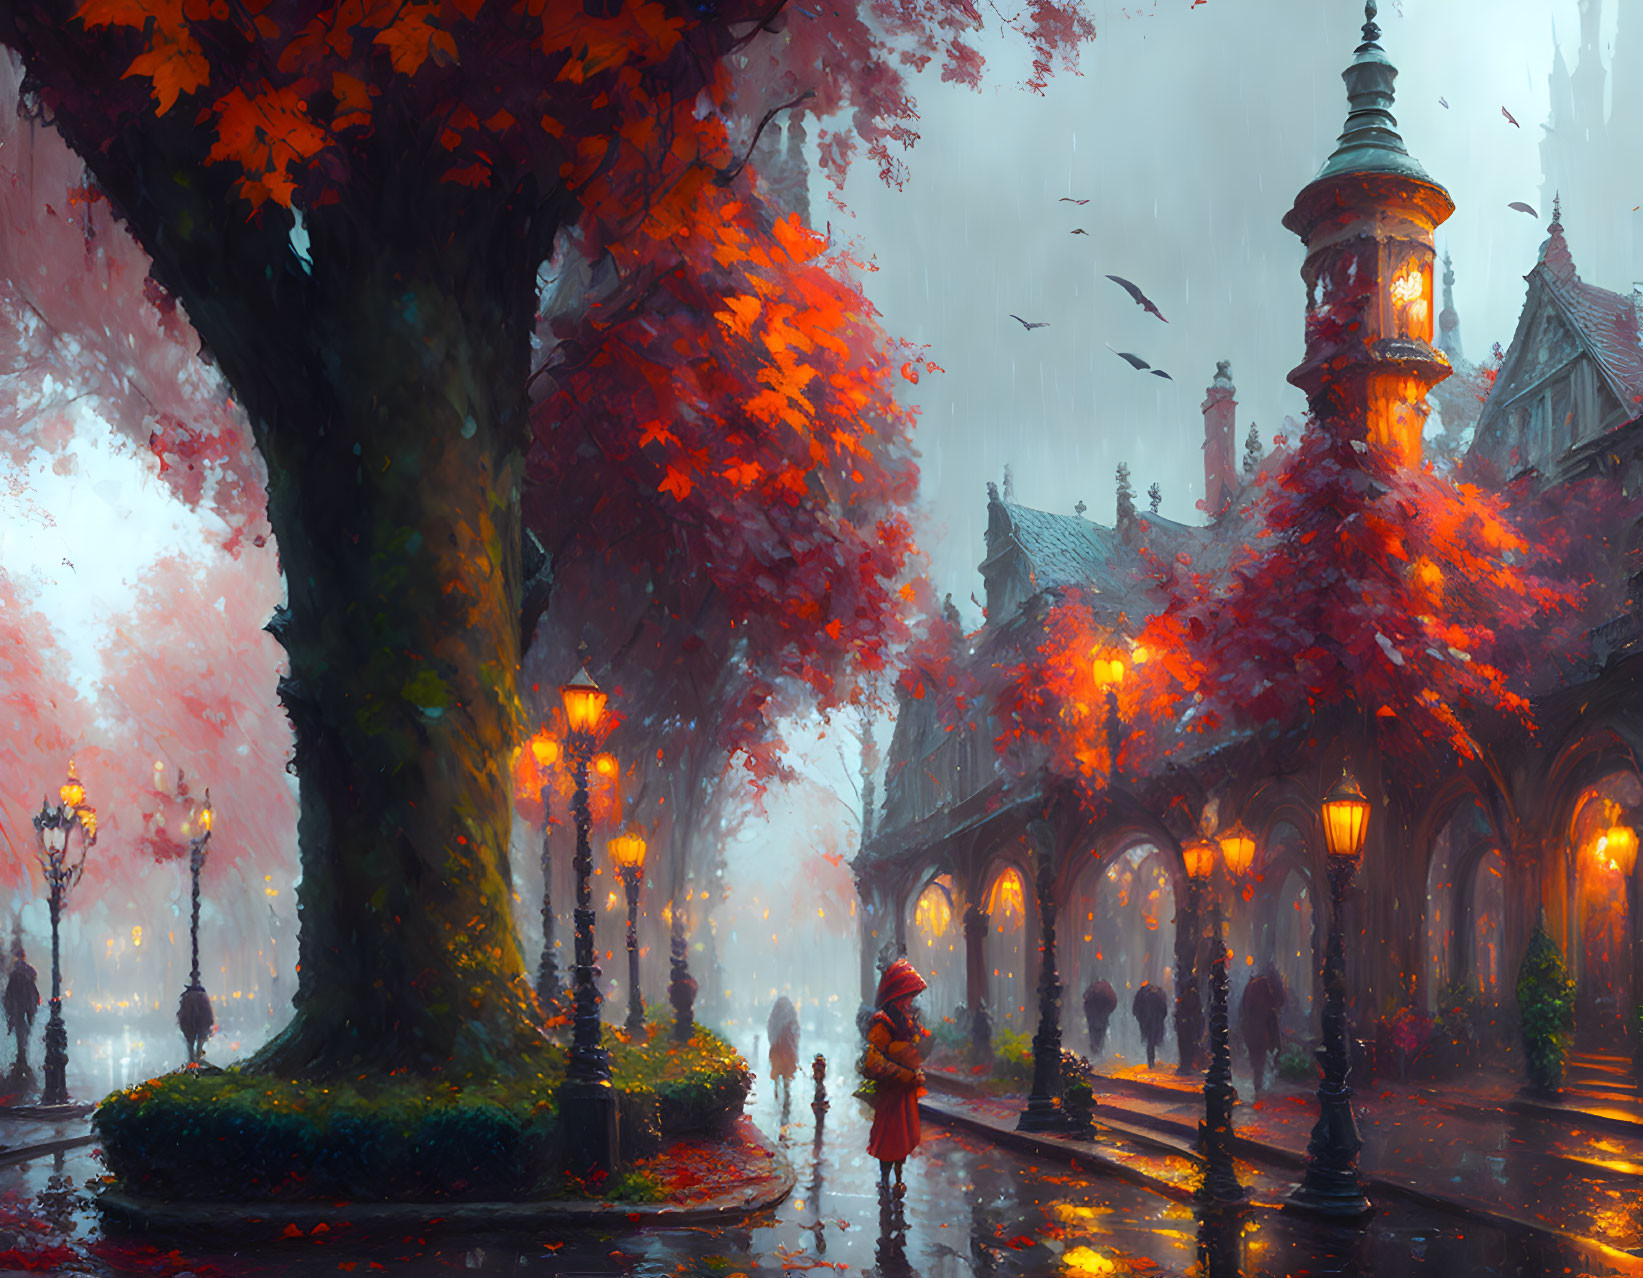 Illustration of Misty Cobblestone Street with Autumn Trees and Red-Cloaked Figure